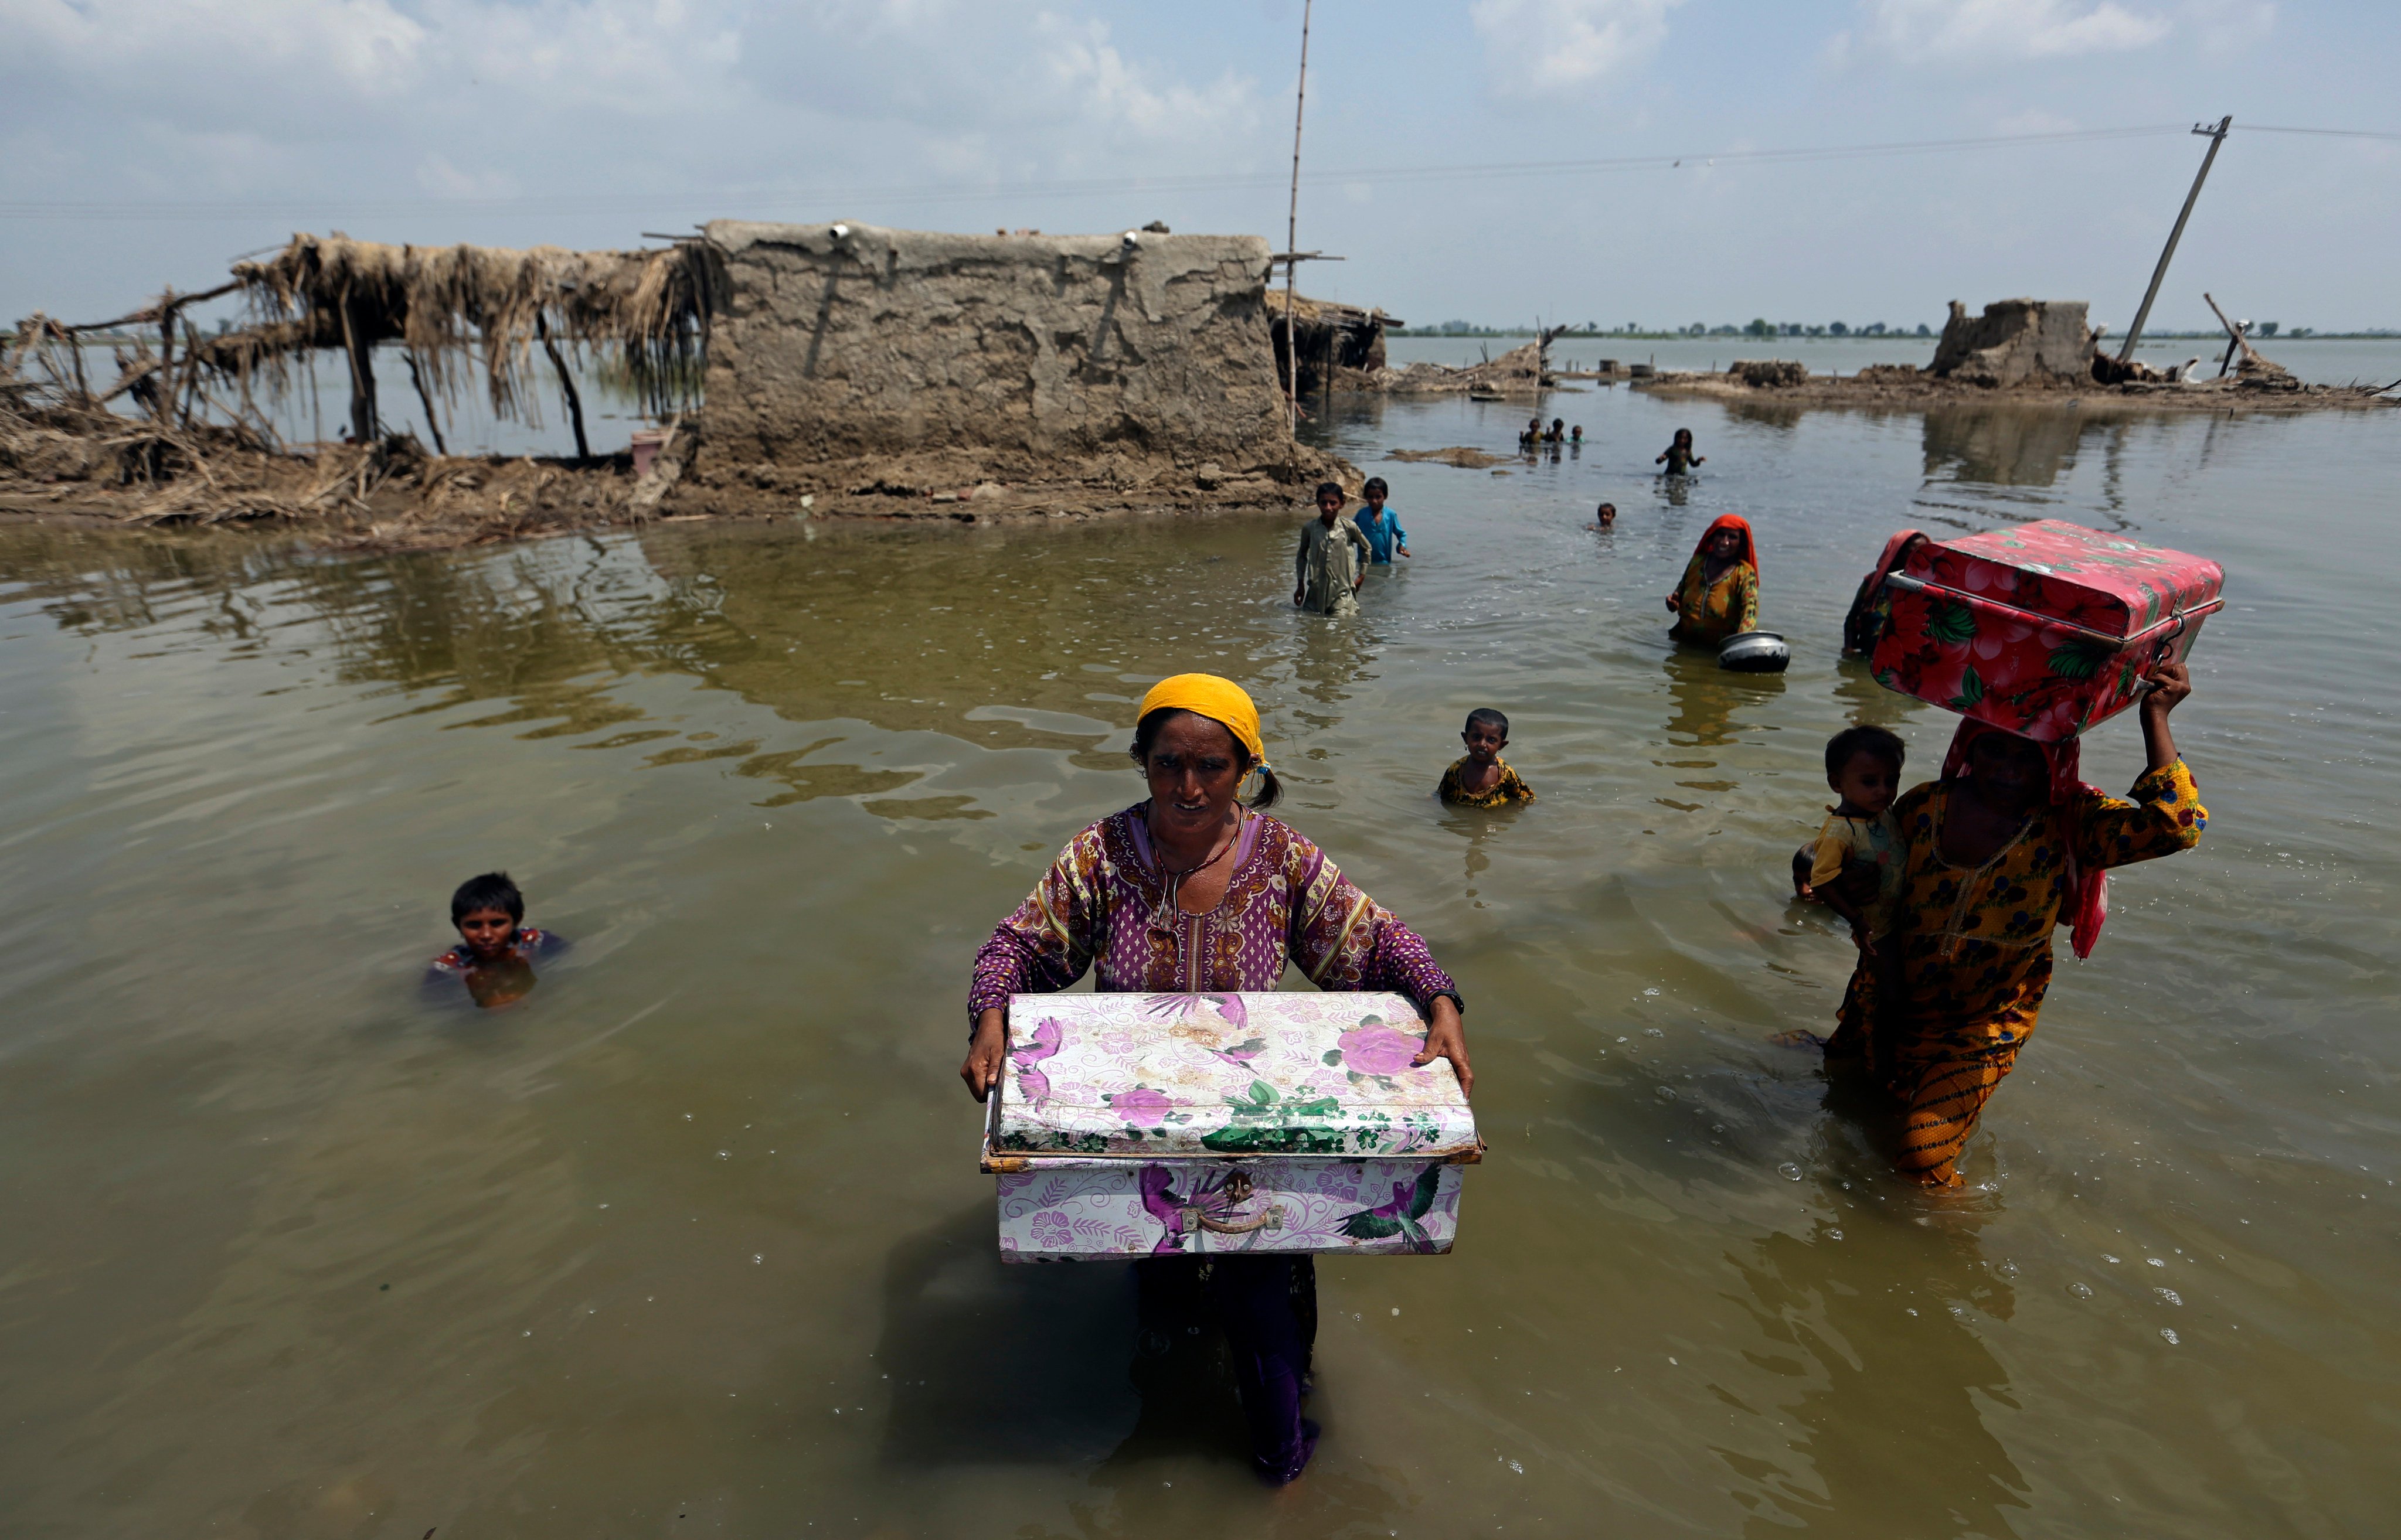 Women carry belongings salvaged from their flooded home following monsoon rains in the Qambar Shahdadkot district of Sindh province, in Pakistan, on September 6. Photo: AP